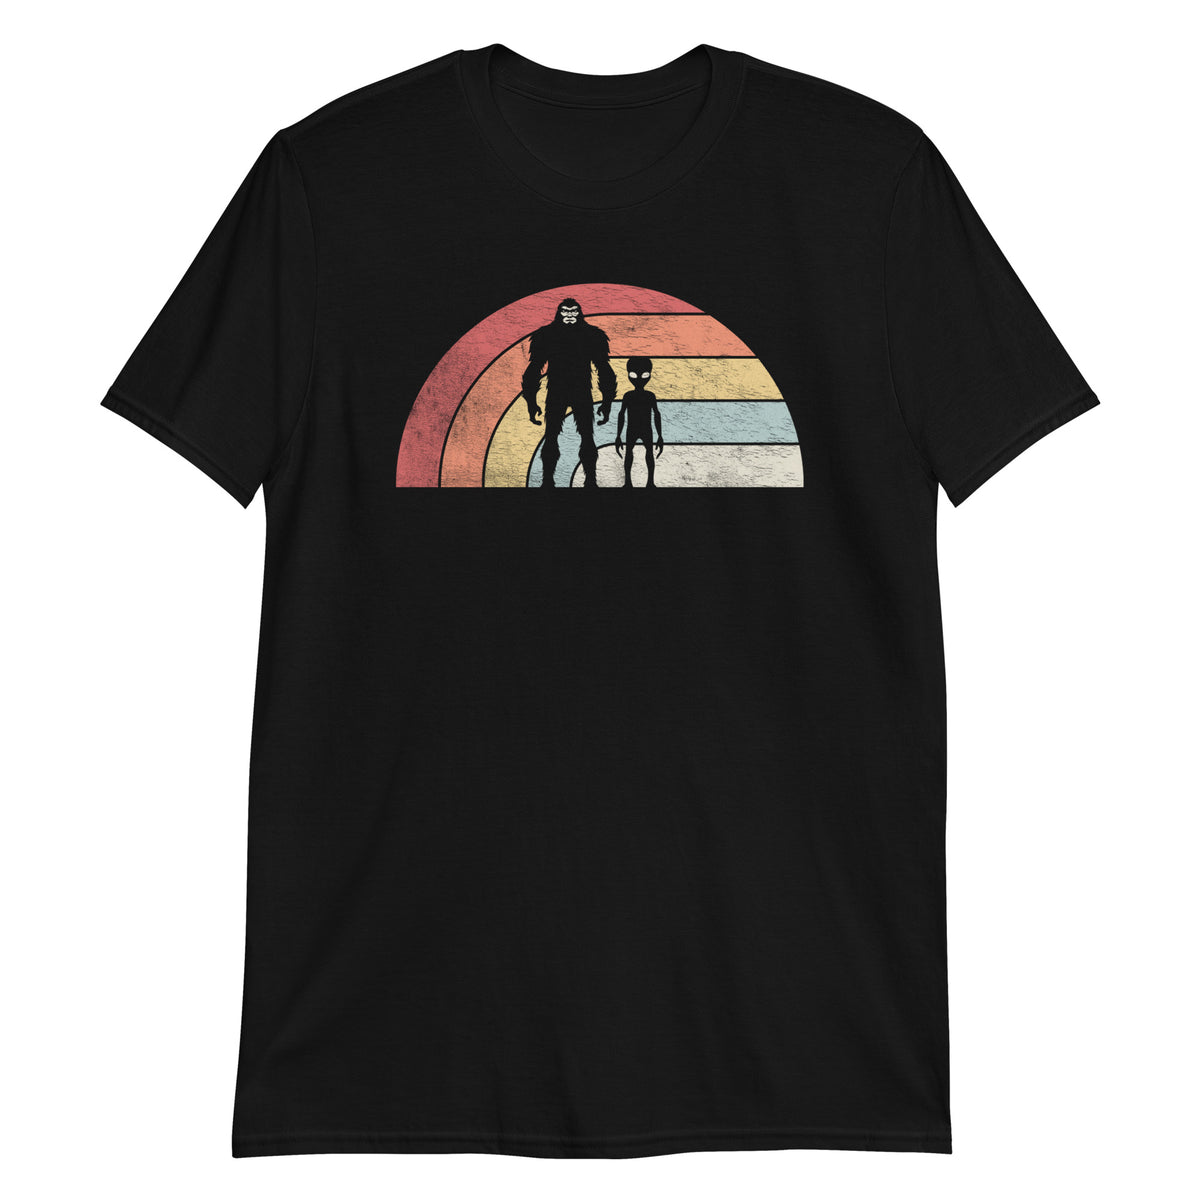 Our Friends from the Space T-Shirt